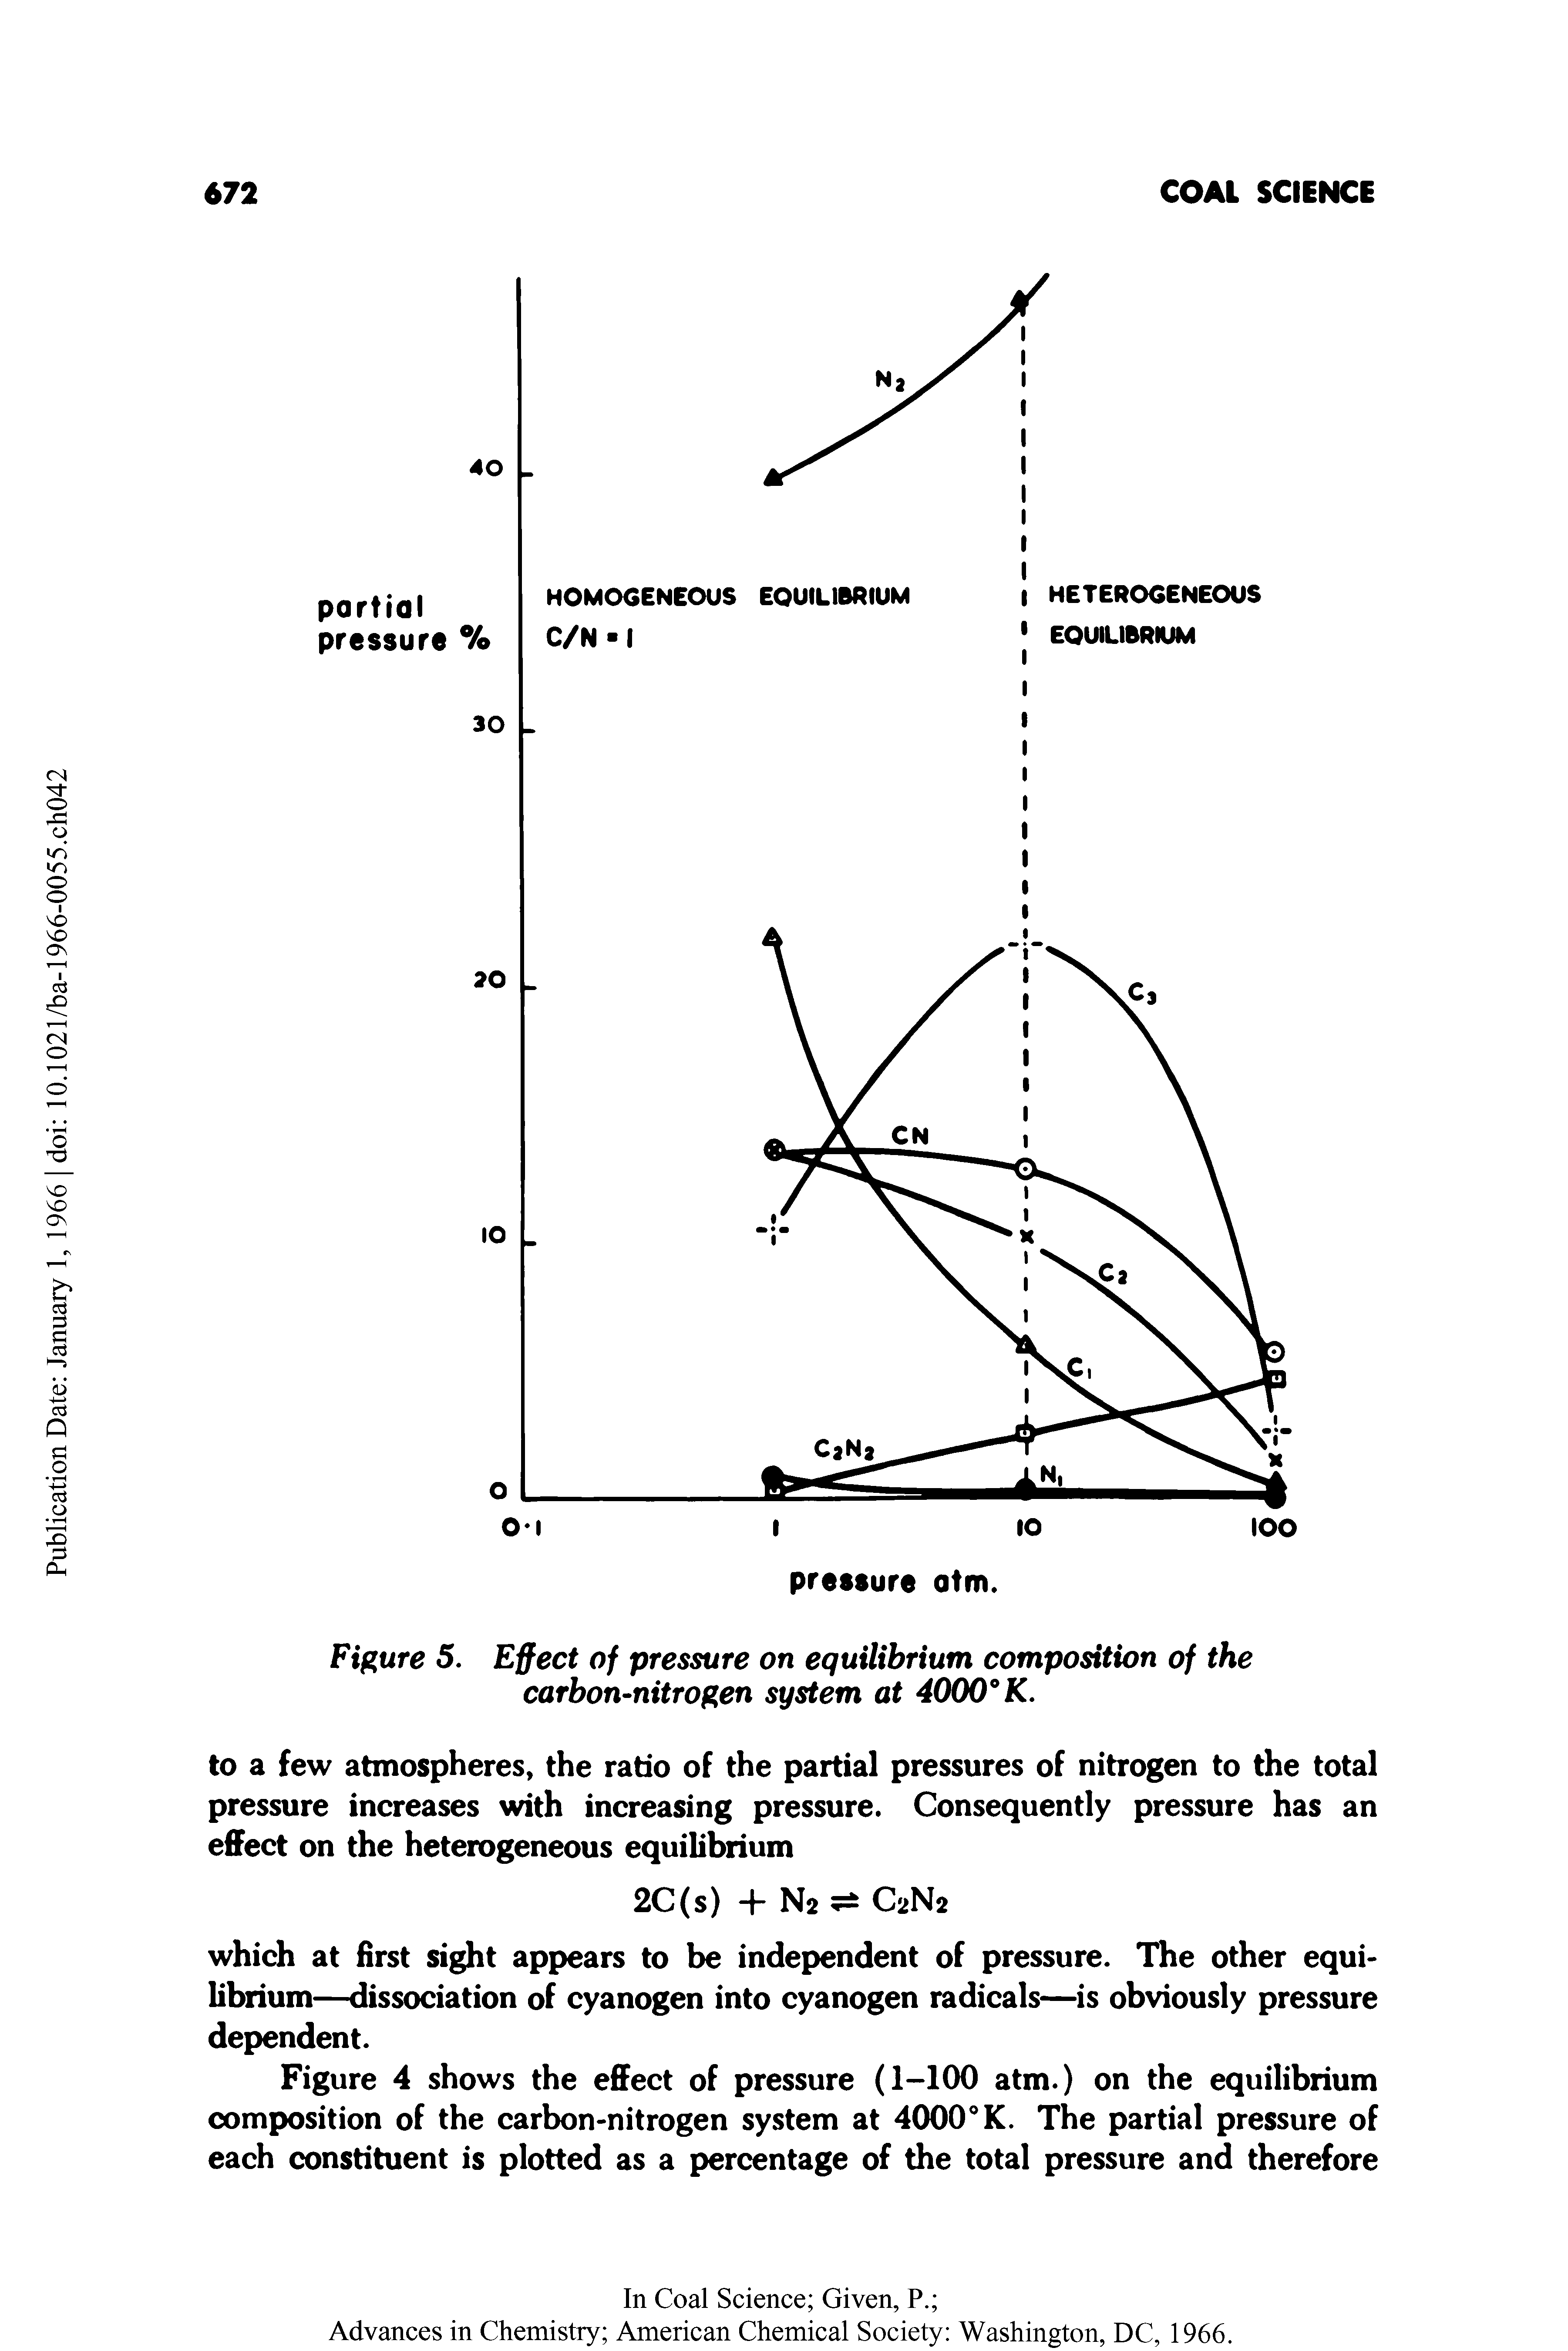 Figure 5. Effect of pressure on equilibrium composition of the carbon-nitrogen system at 4000° K.